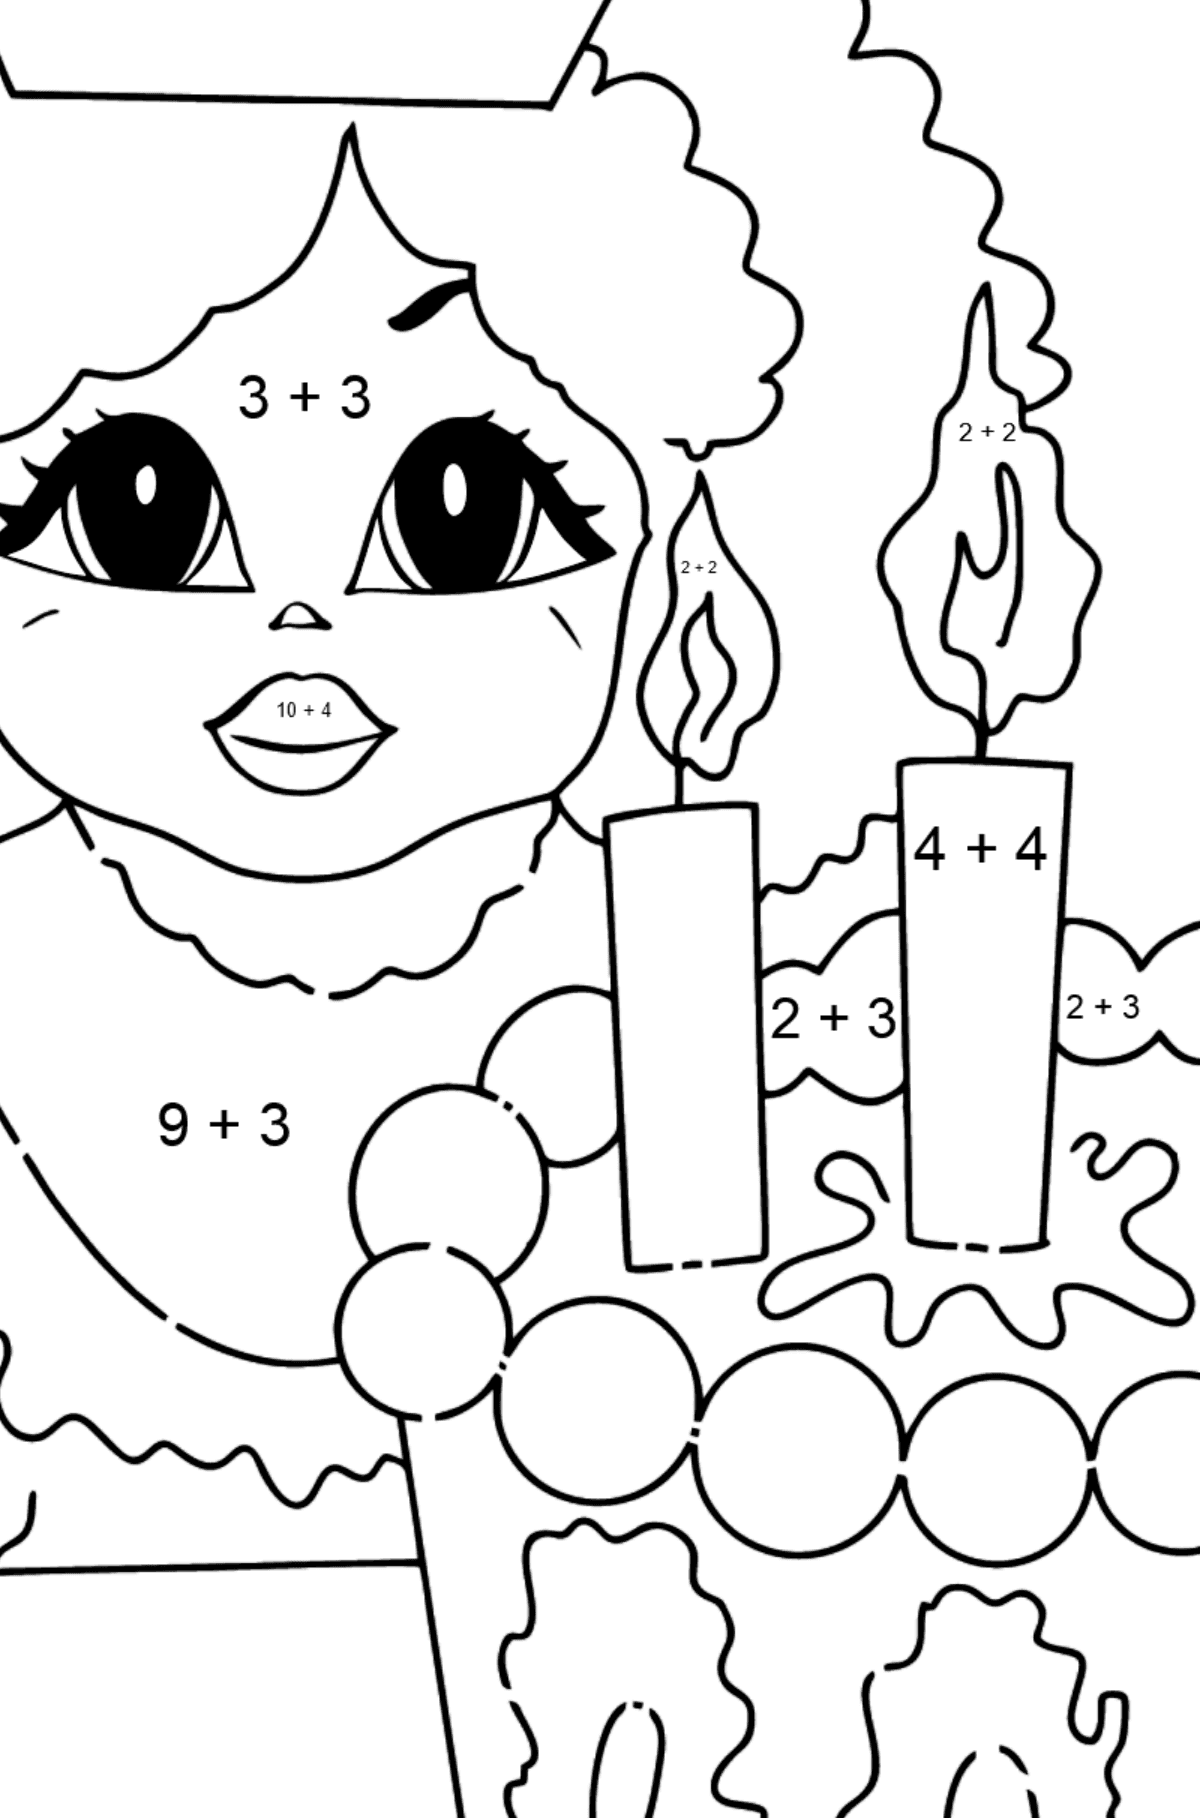 Coloring Page - A Princess with Cake - For Girls - Math Coloring - Addition for Kids